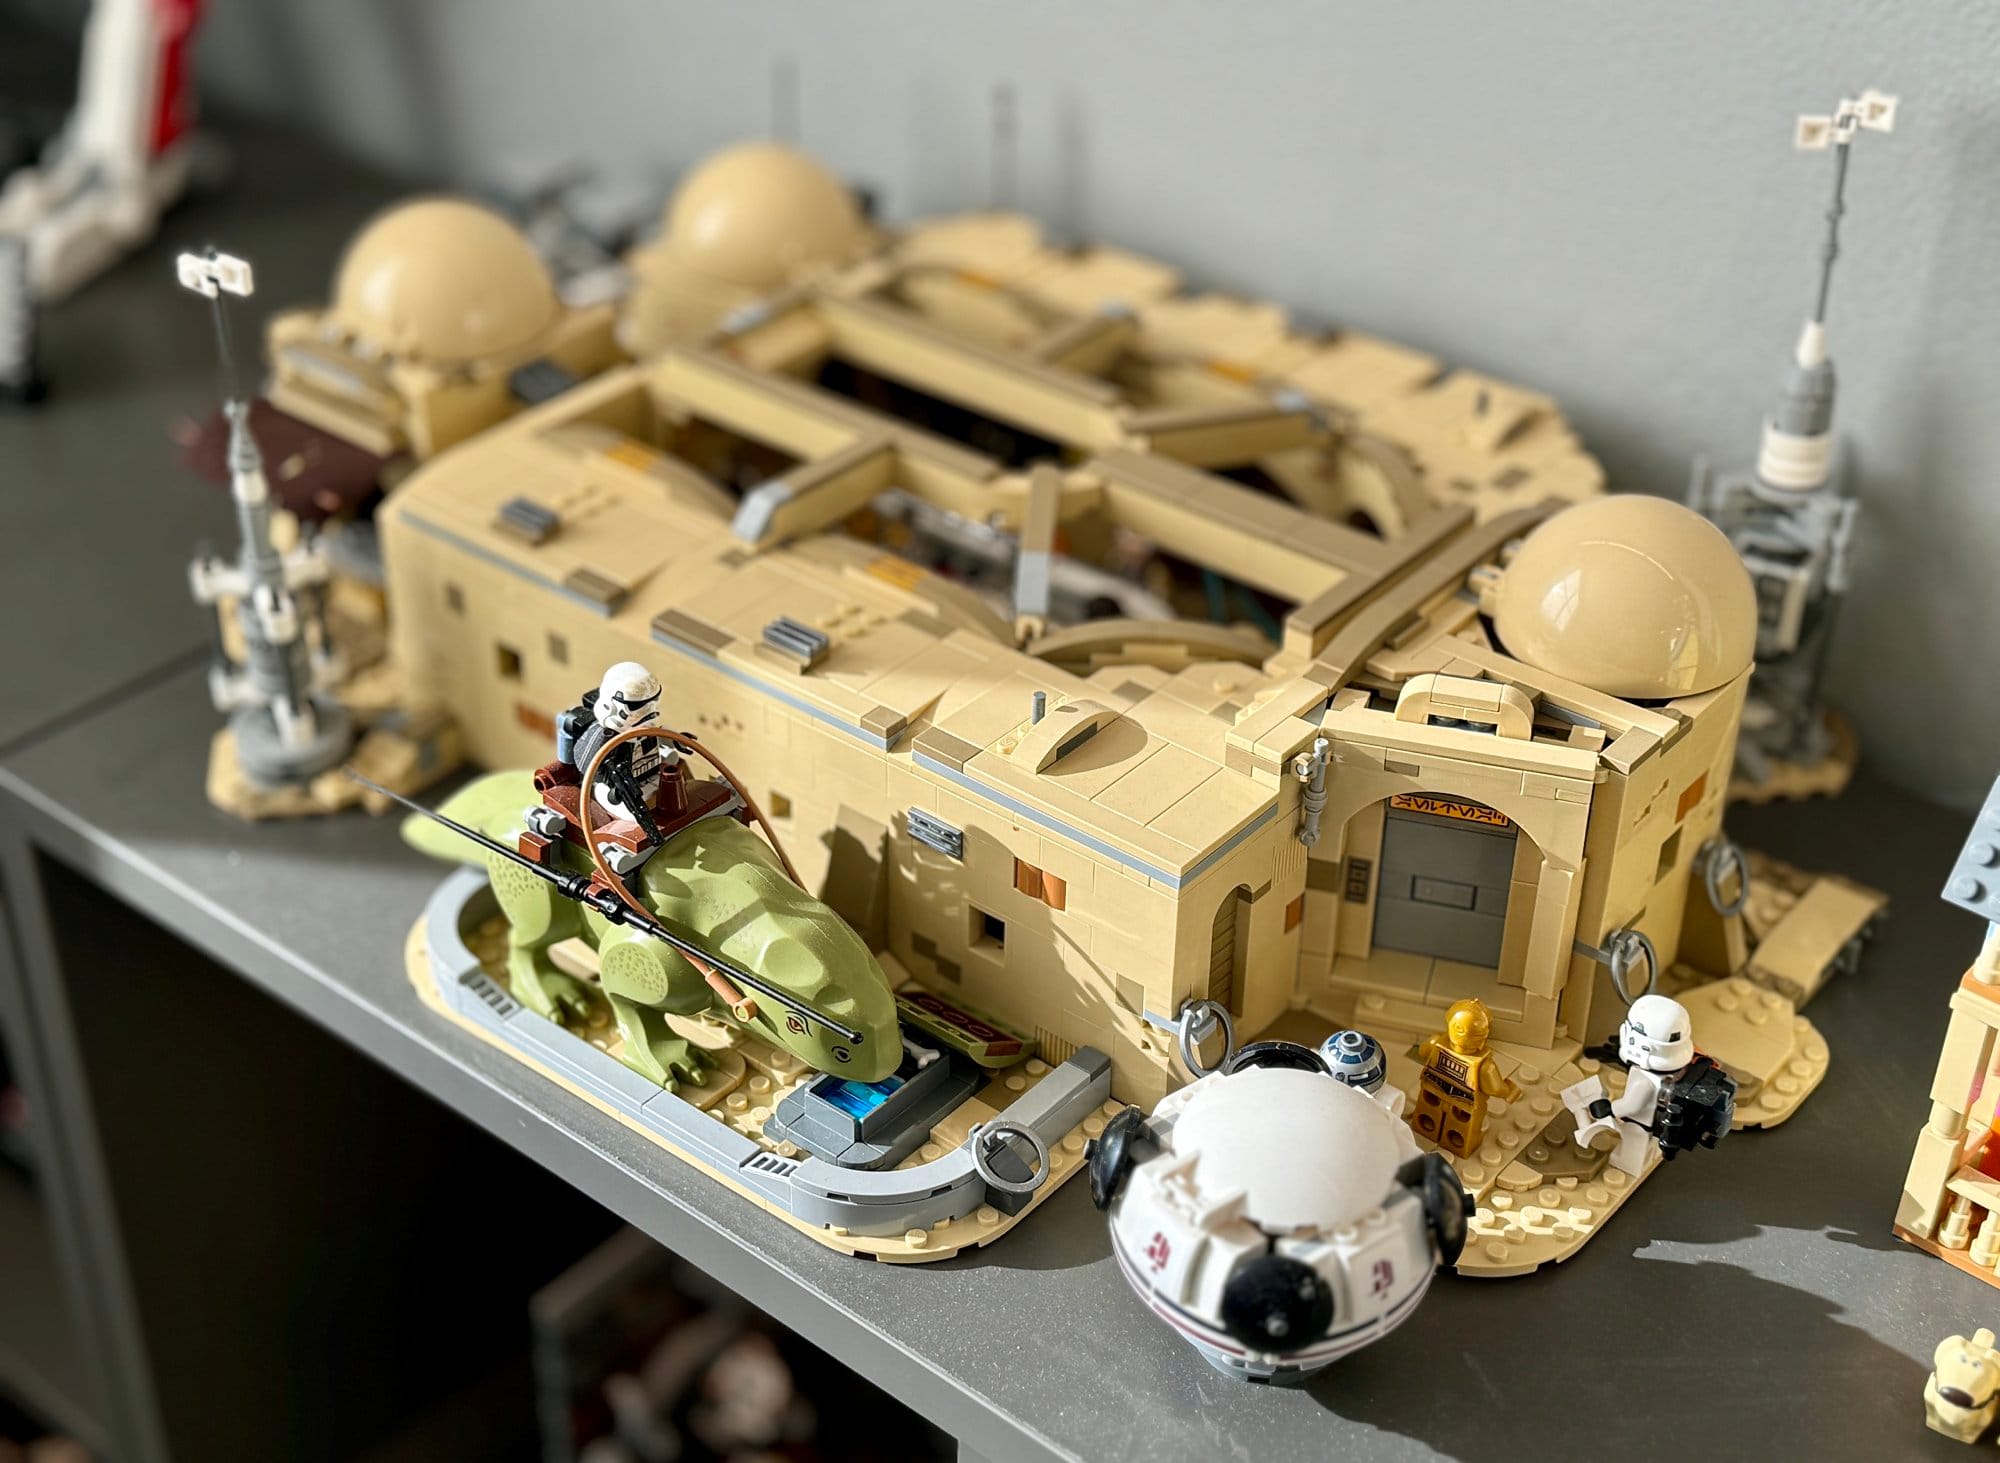 A detailed LEGO 75290 Star Wars model scene with a central tan building, a green and brown speeder with a figure, and various characters including white-armoured figures around it